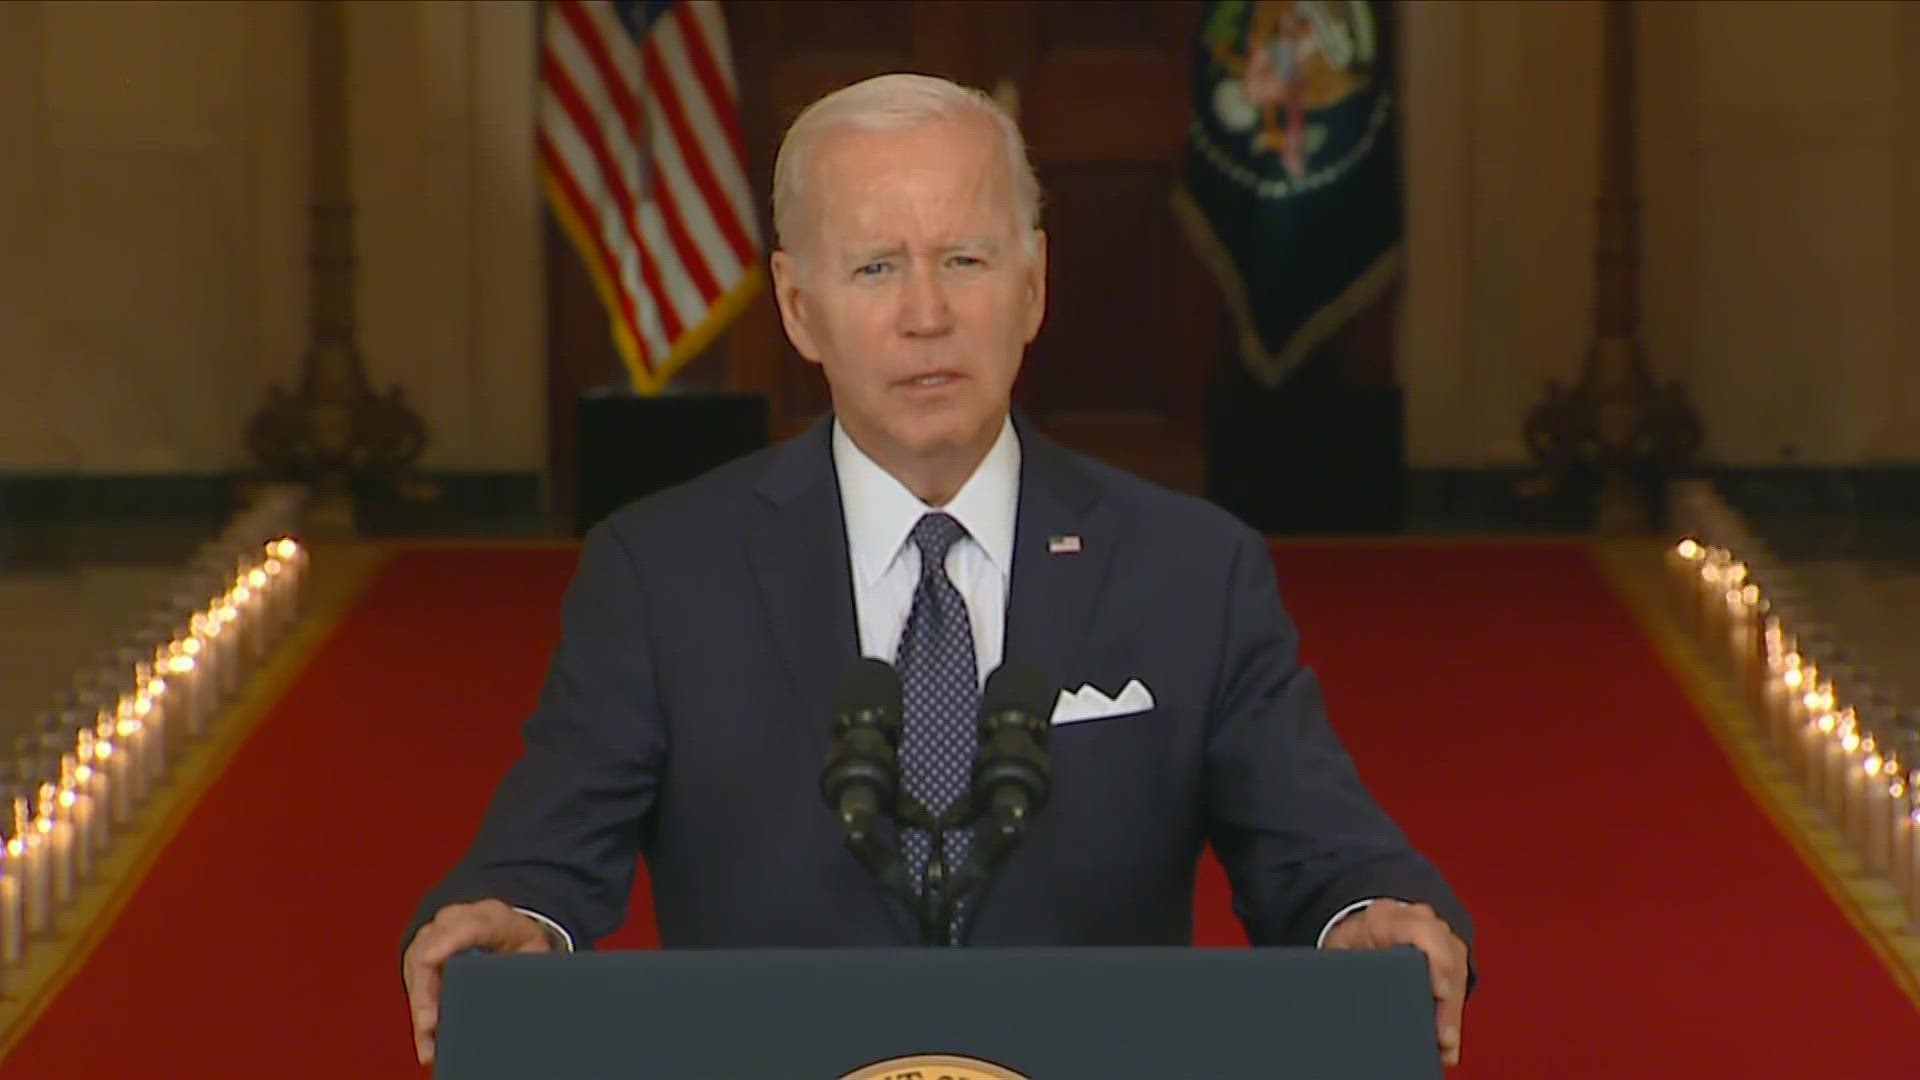 President Joe Biden said family members from the mass shootings in Buffalo and Uvalde had one message to pass along: 'Just do something' about gun violence.